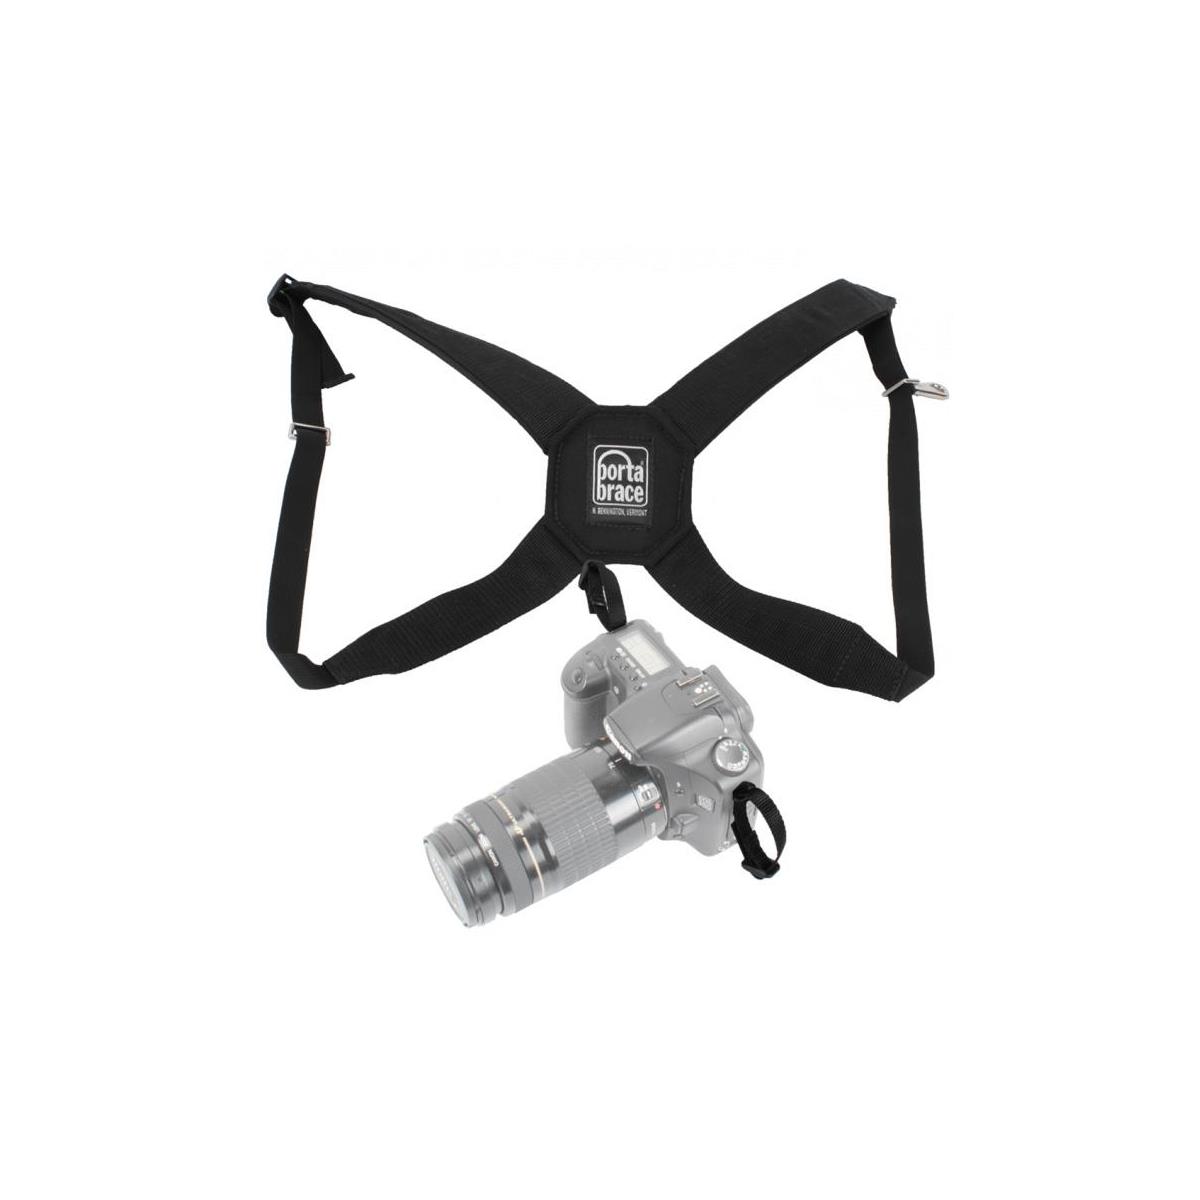 Image of Porta Brace Durable Nylon DSLR Harness with Padded Back Cross-Section